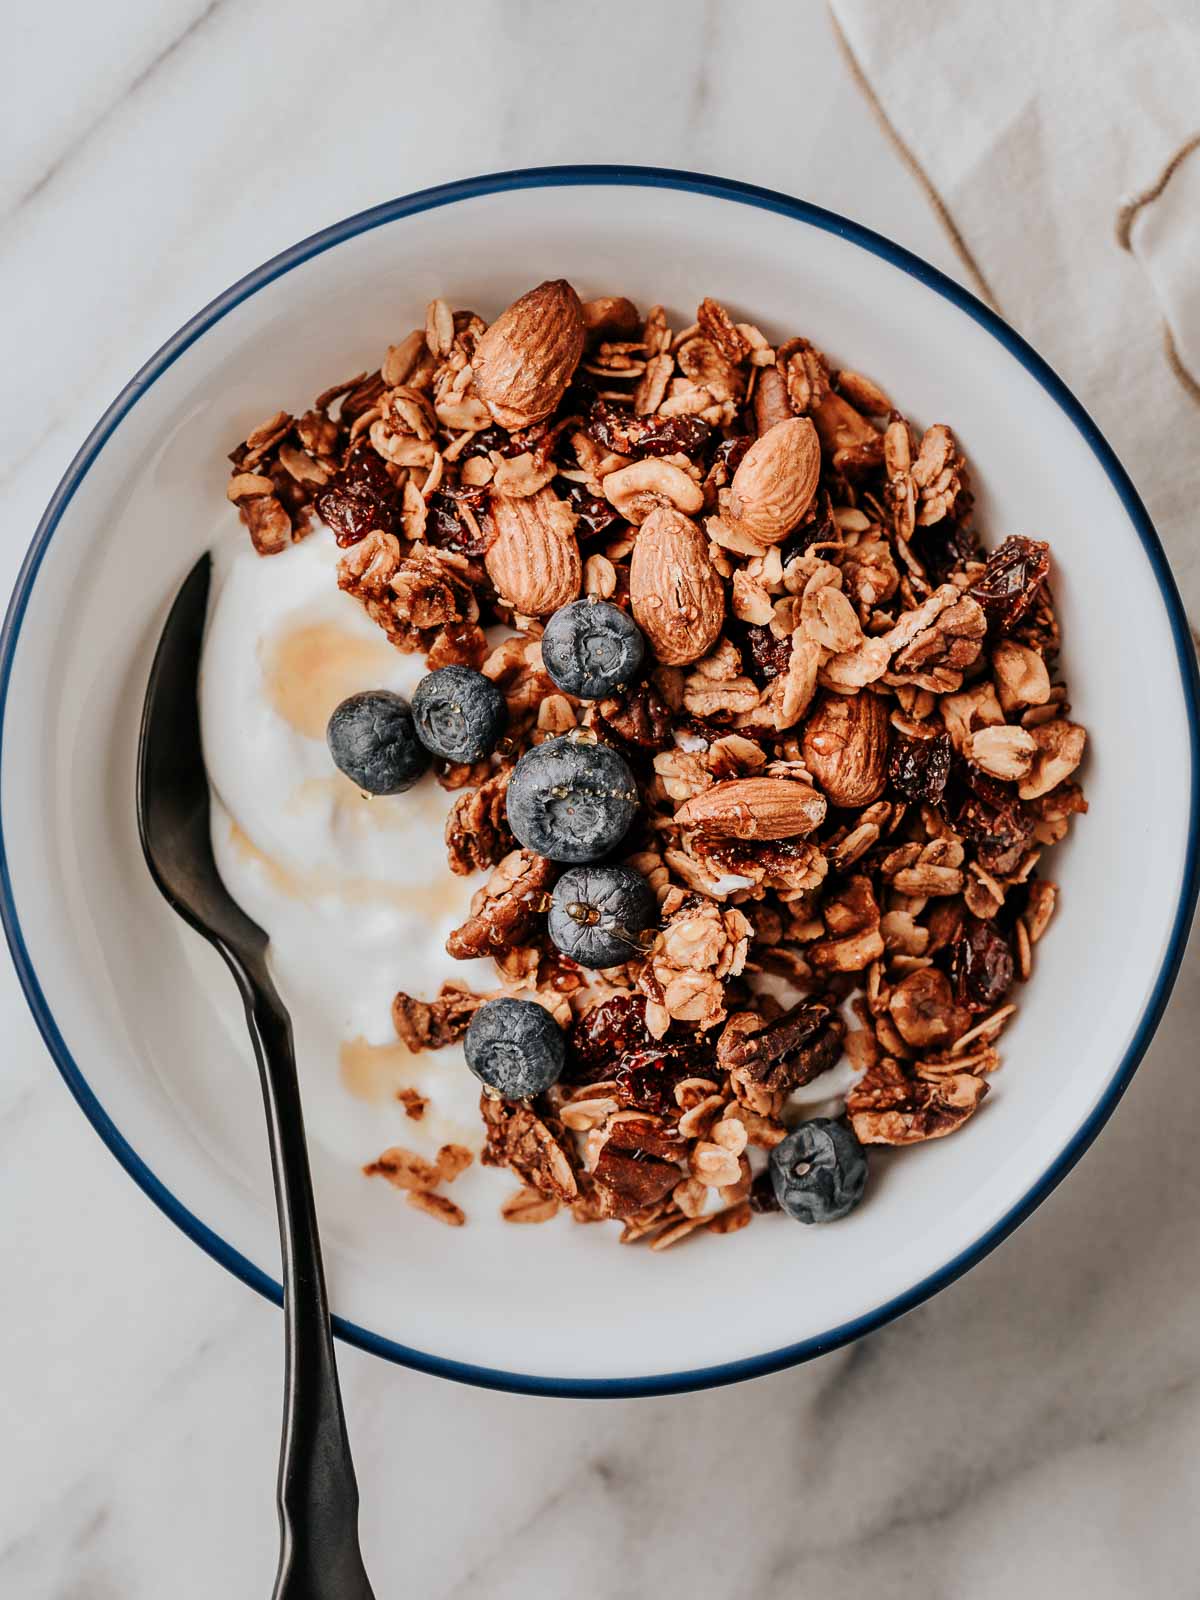 Granola and fresh blueberries in a bowl with yogurt.